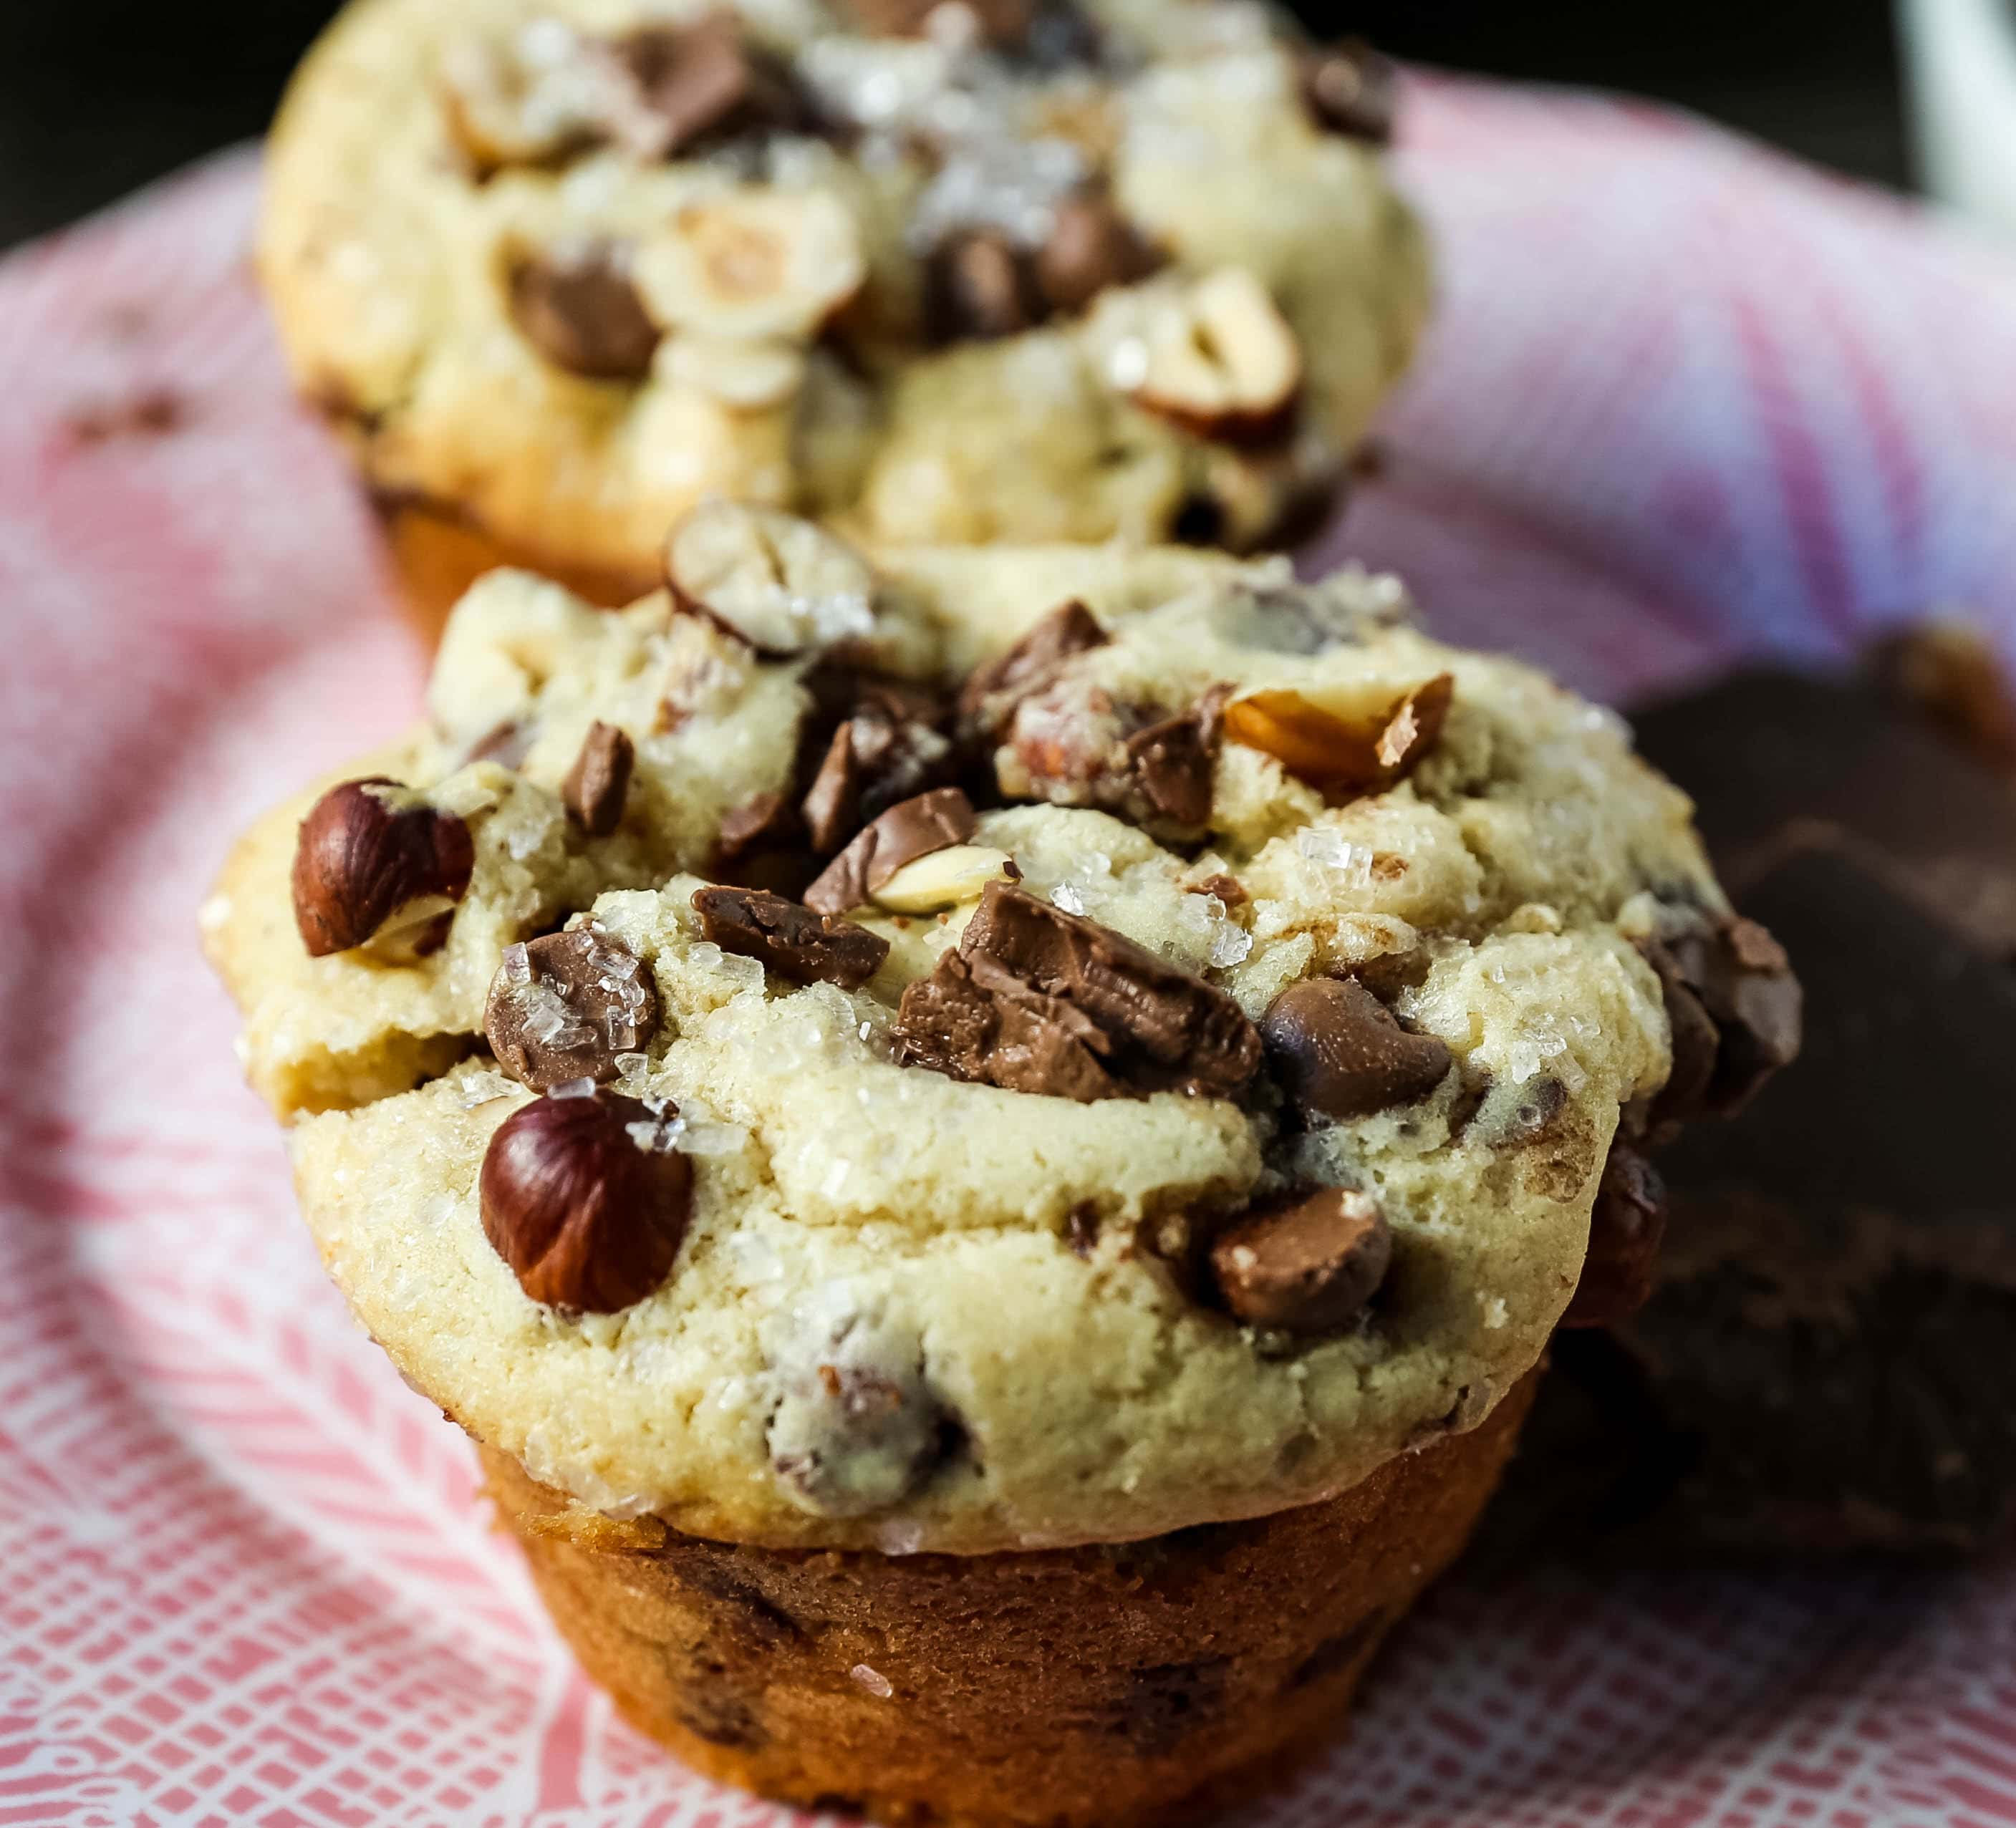 The Best Chocolate Chip Muffins. Chocolate Chunk Hazelnut Muffins with rich chocolate chips and crunchy hazelnuts. A gourmet bakery style muffin recipe. www.modernhoney.com #muffin #muffins #chocolatechipmmuffin #chocolatehazelnut